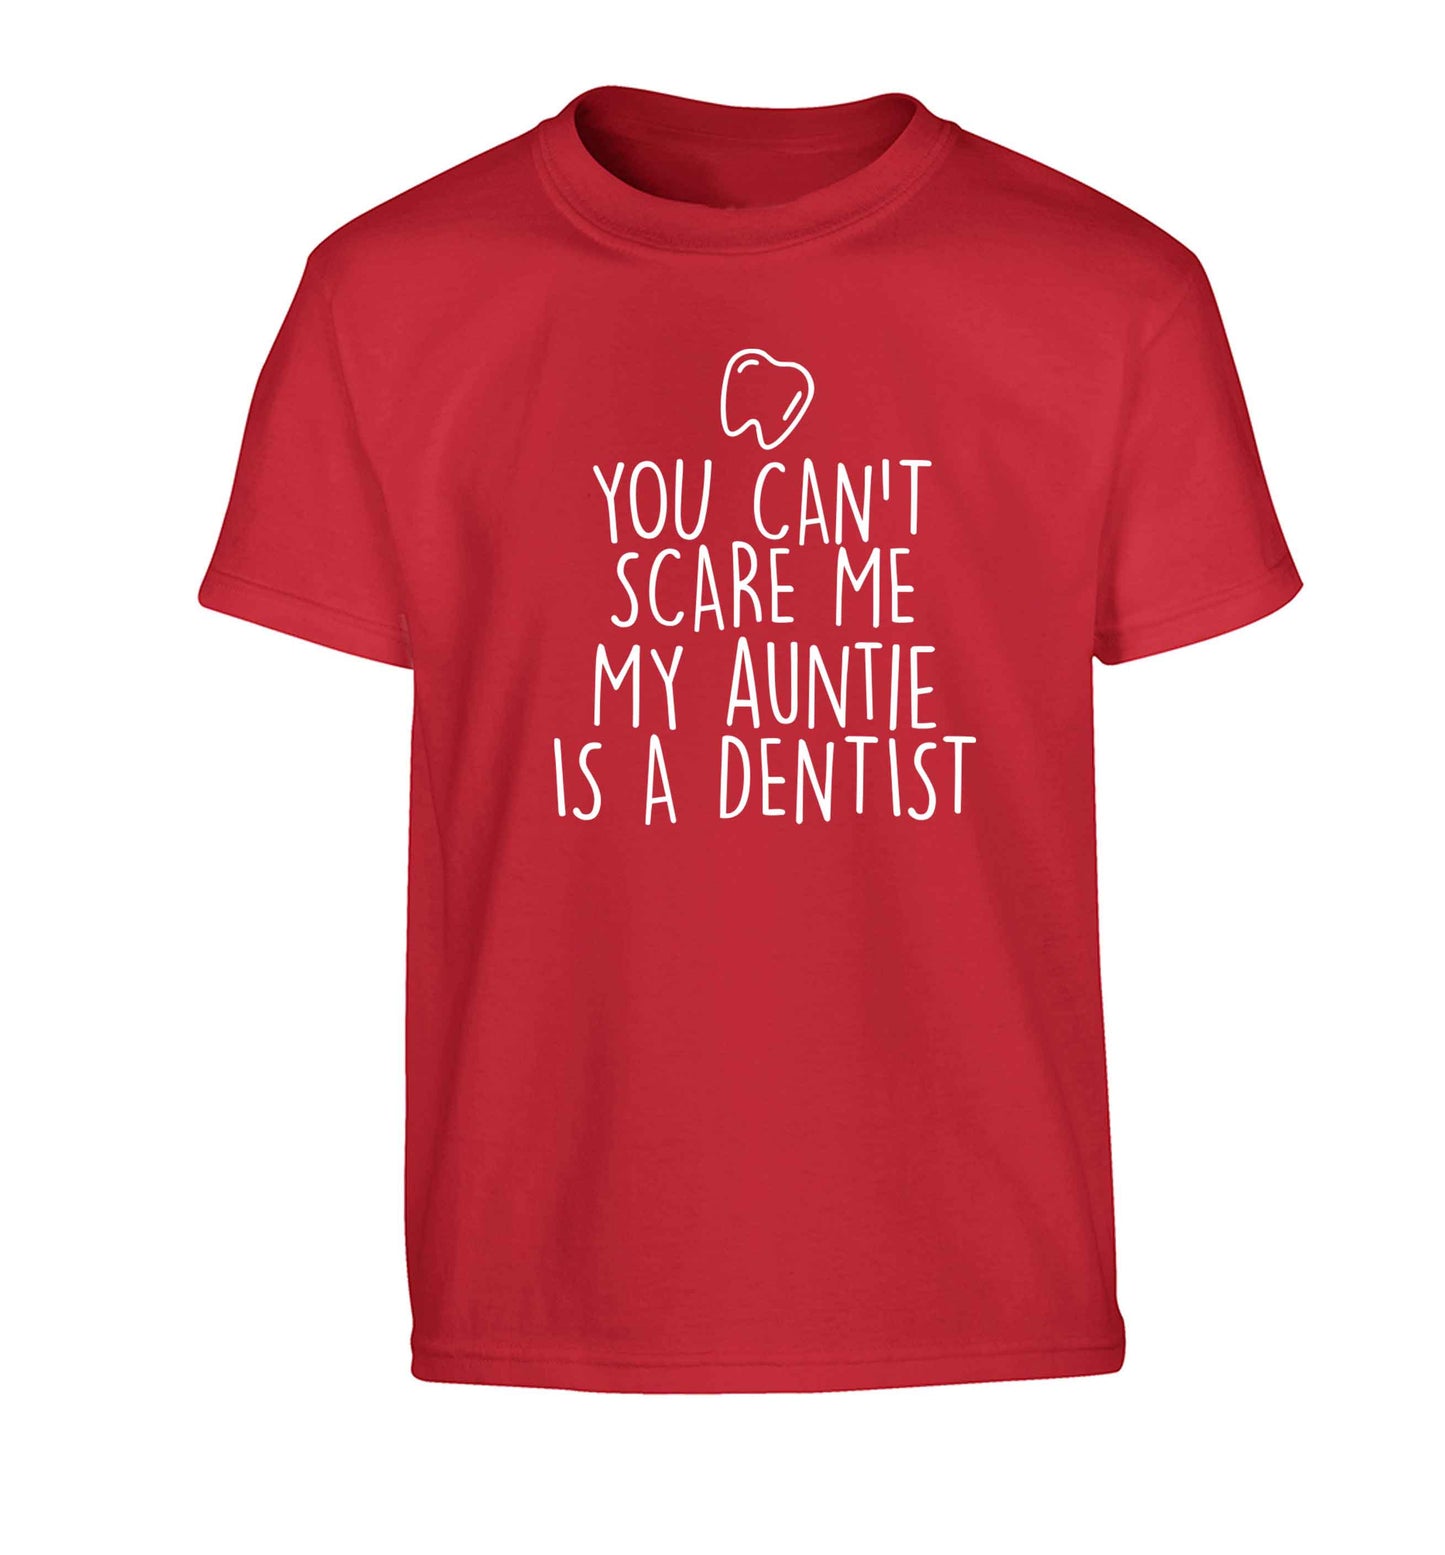 You can't scare me my auntie is a dentist Children's red Tshirt 12-13 Years